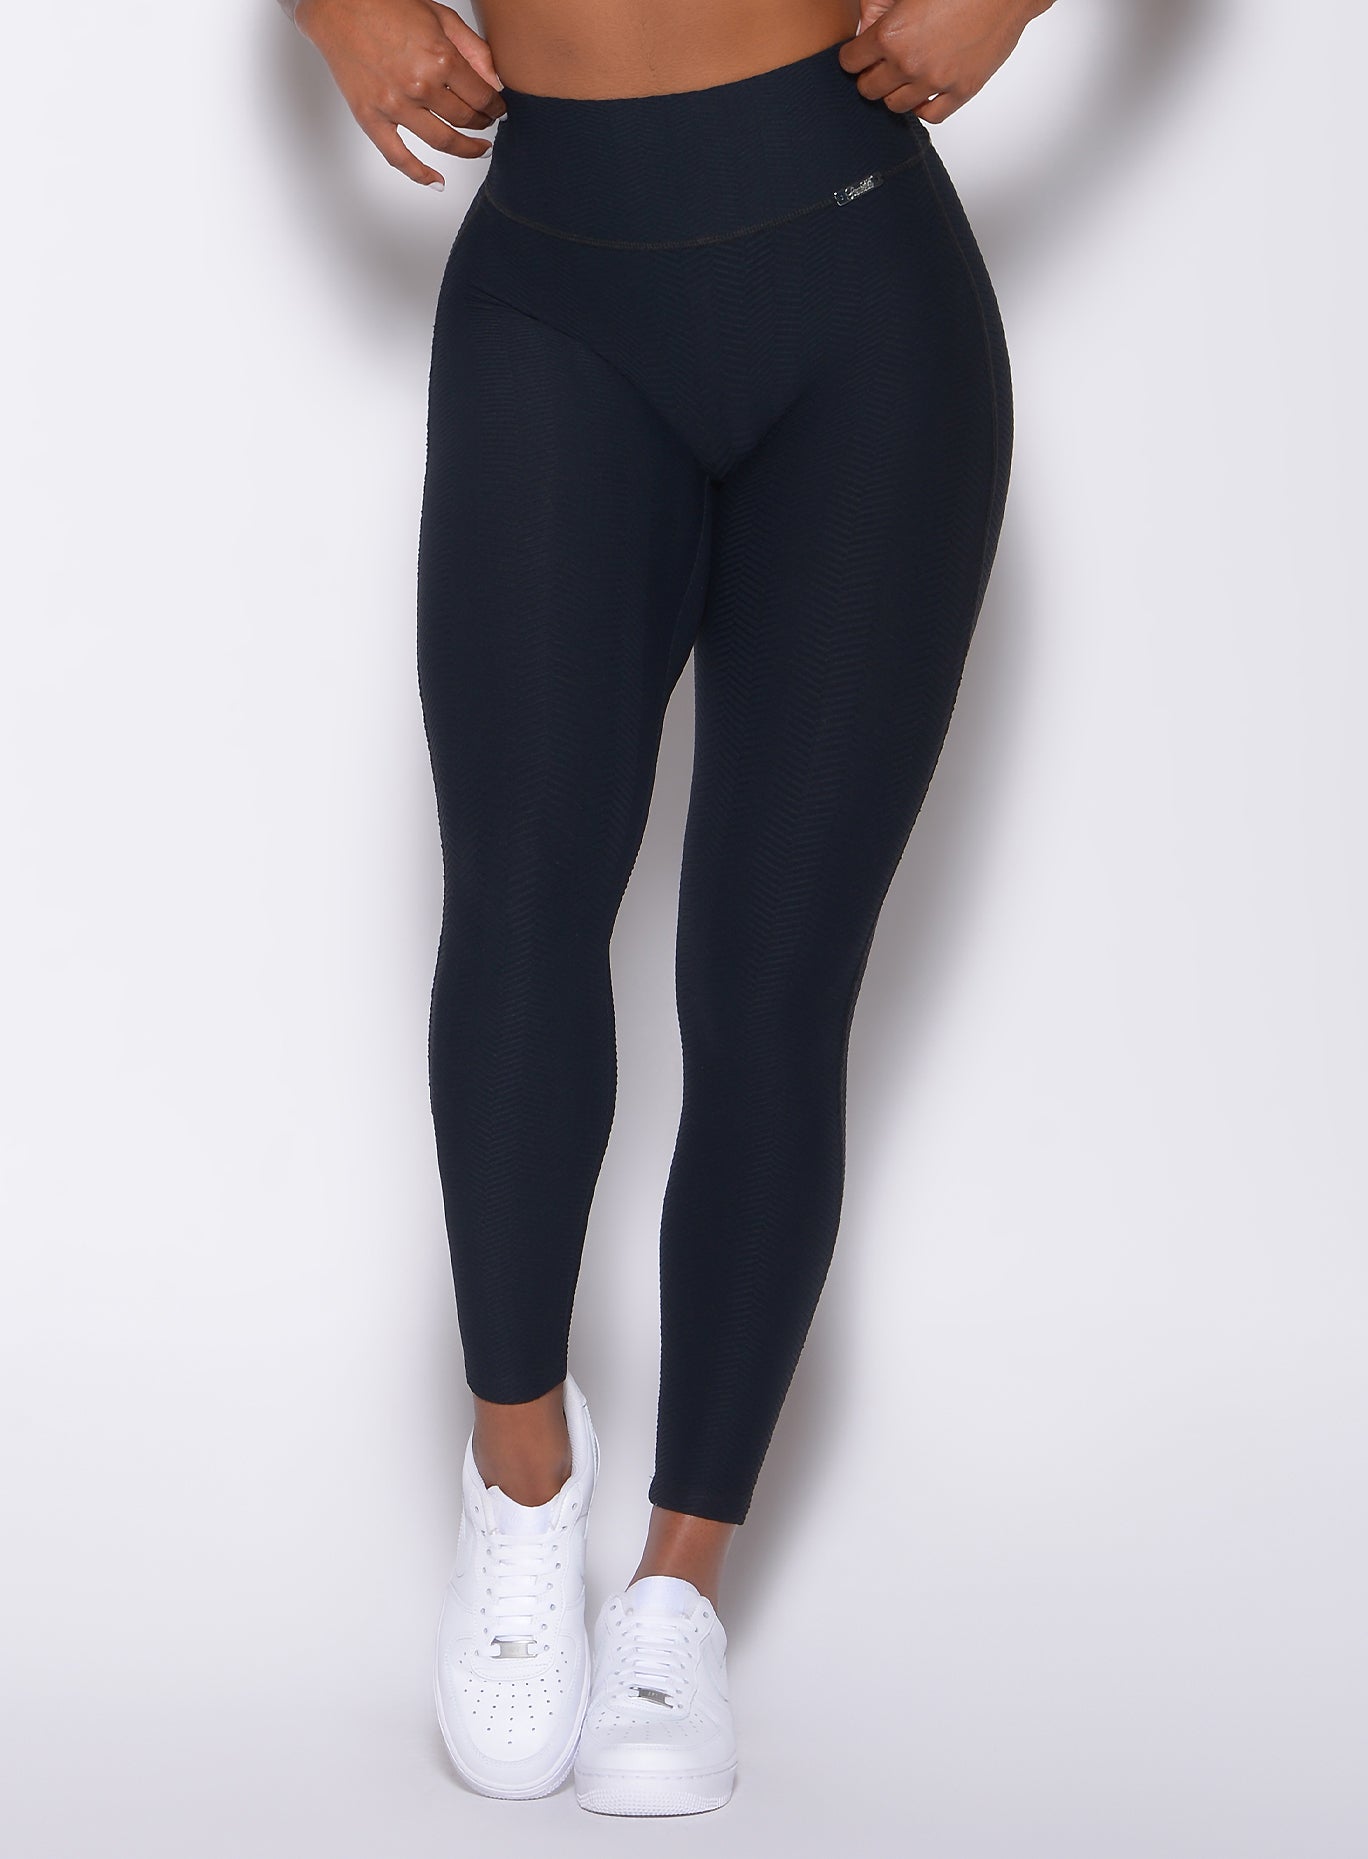 Front view of our chevron leggings in jet black color